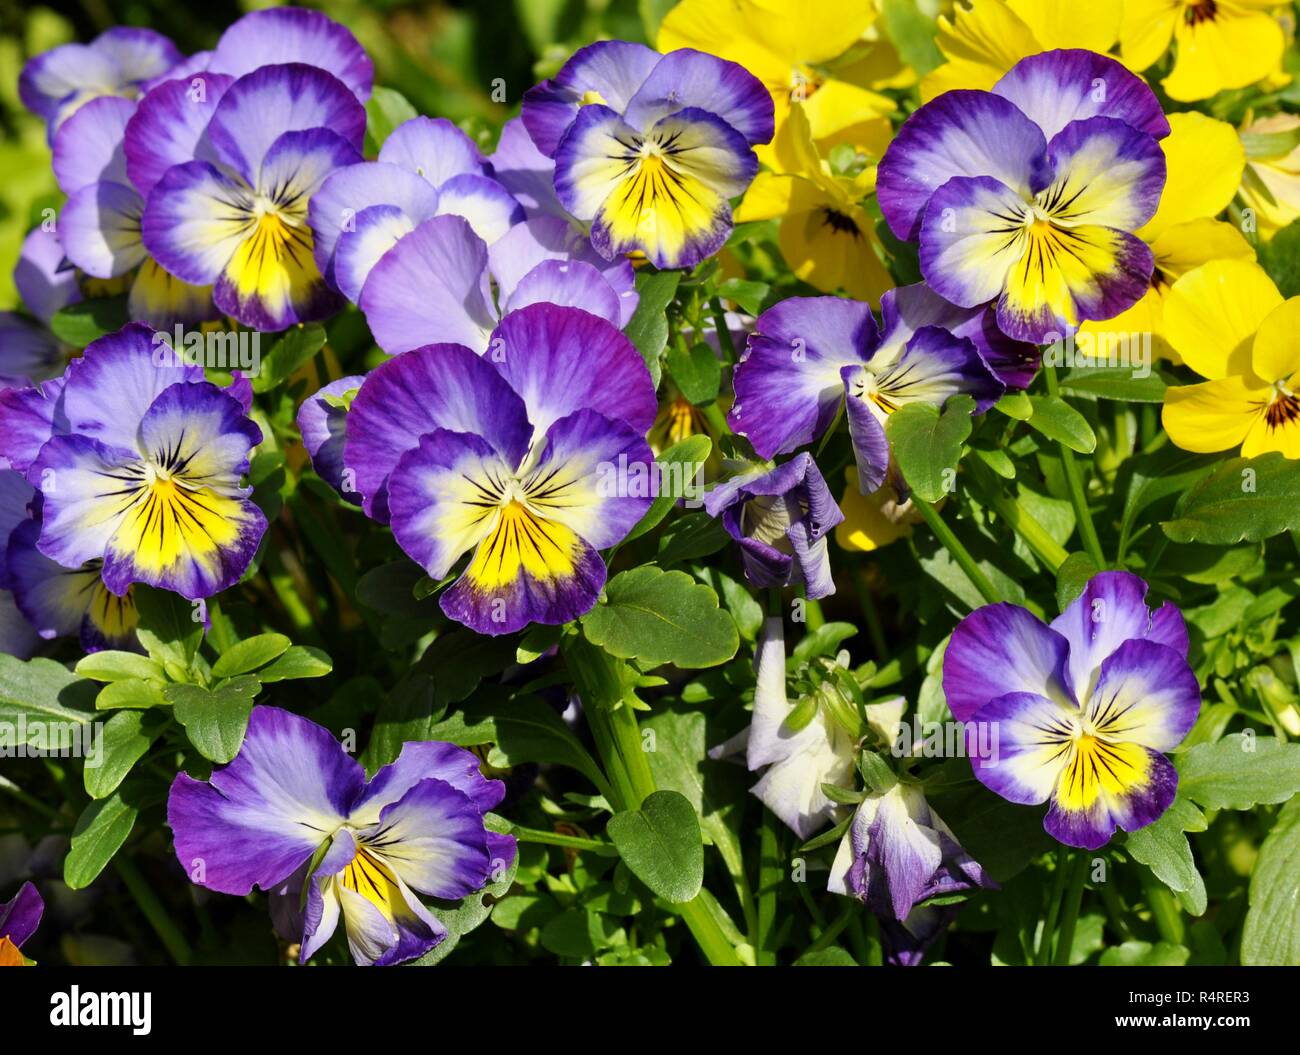 Flowering blue and white pansies Viola tricolor Stock Photo